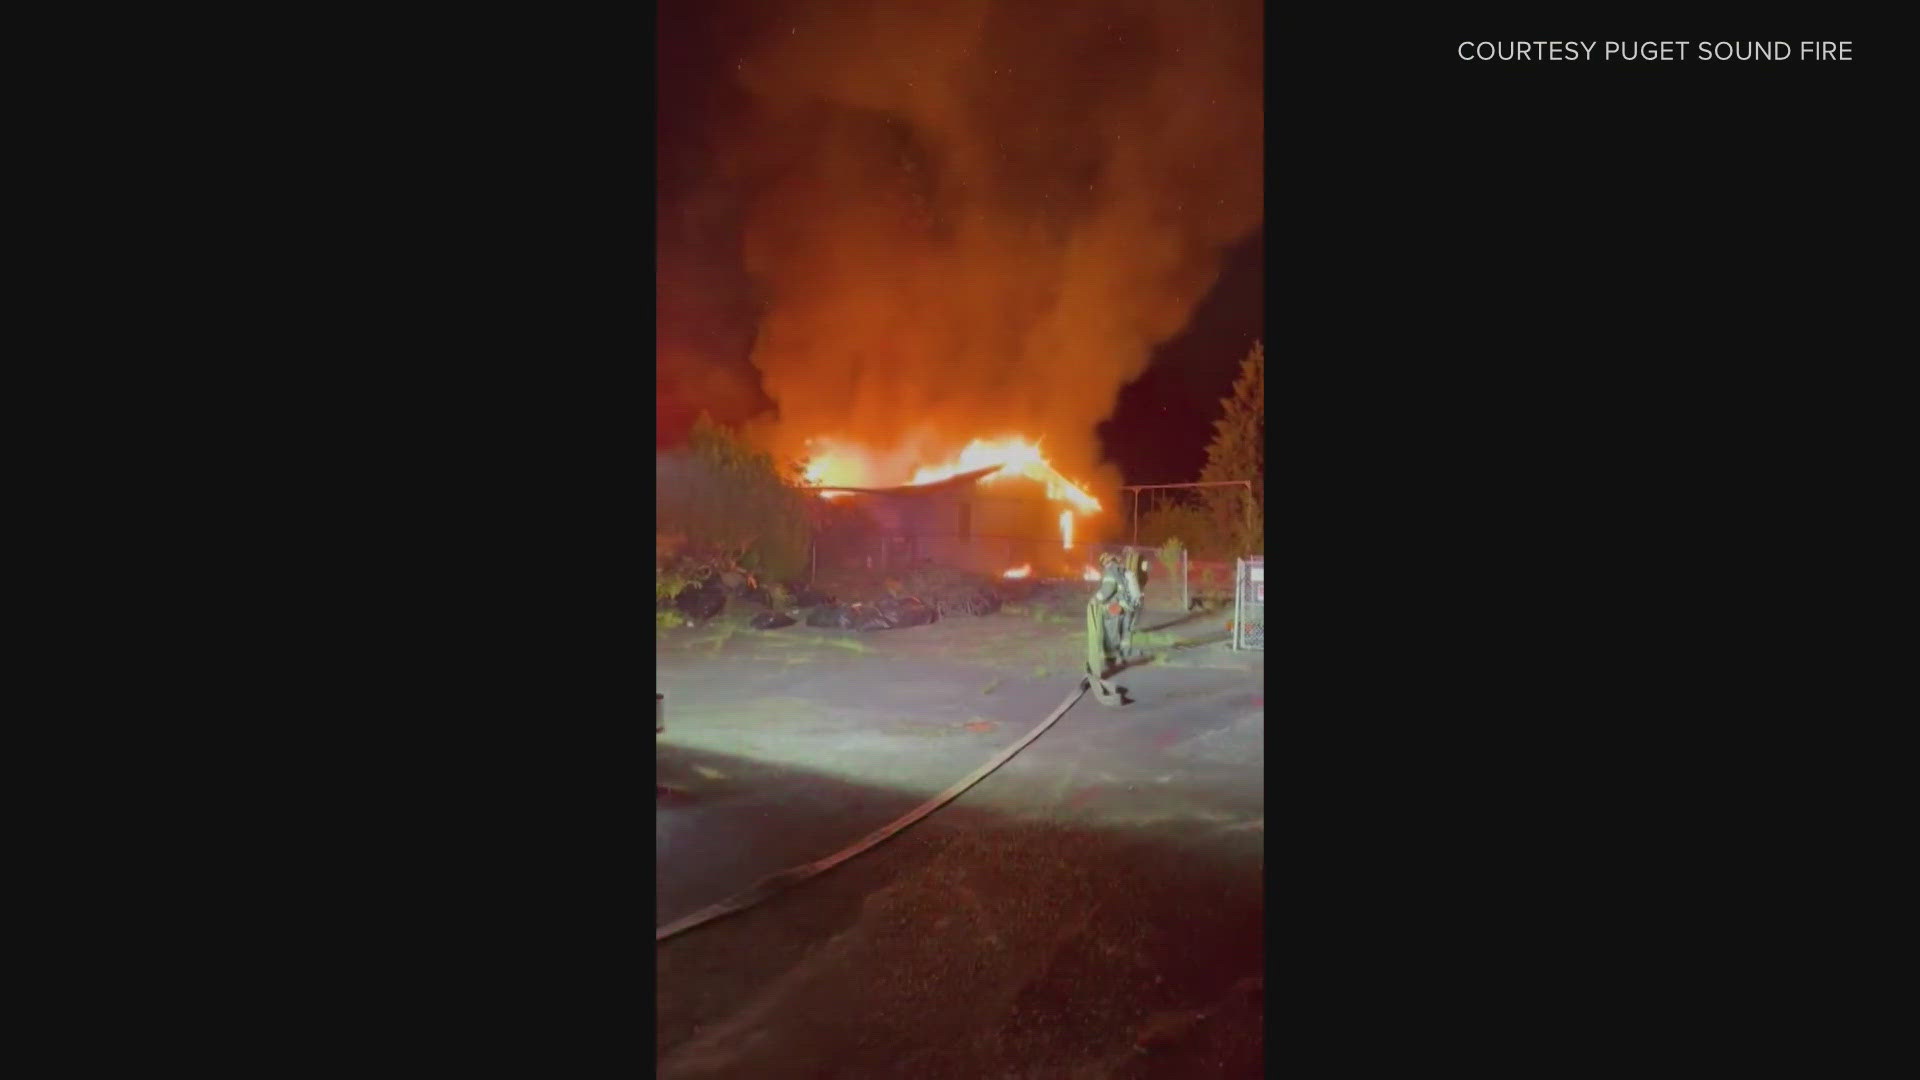 A home that was a former daycare center in Kent caught fire early Friday morning